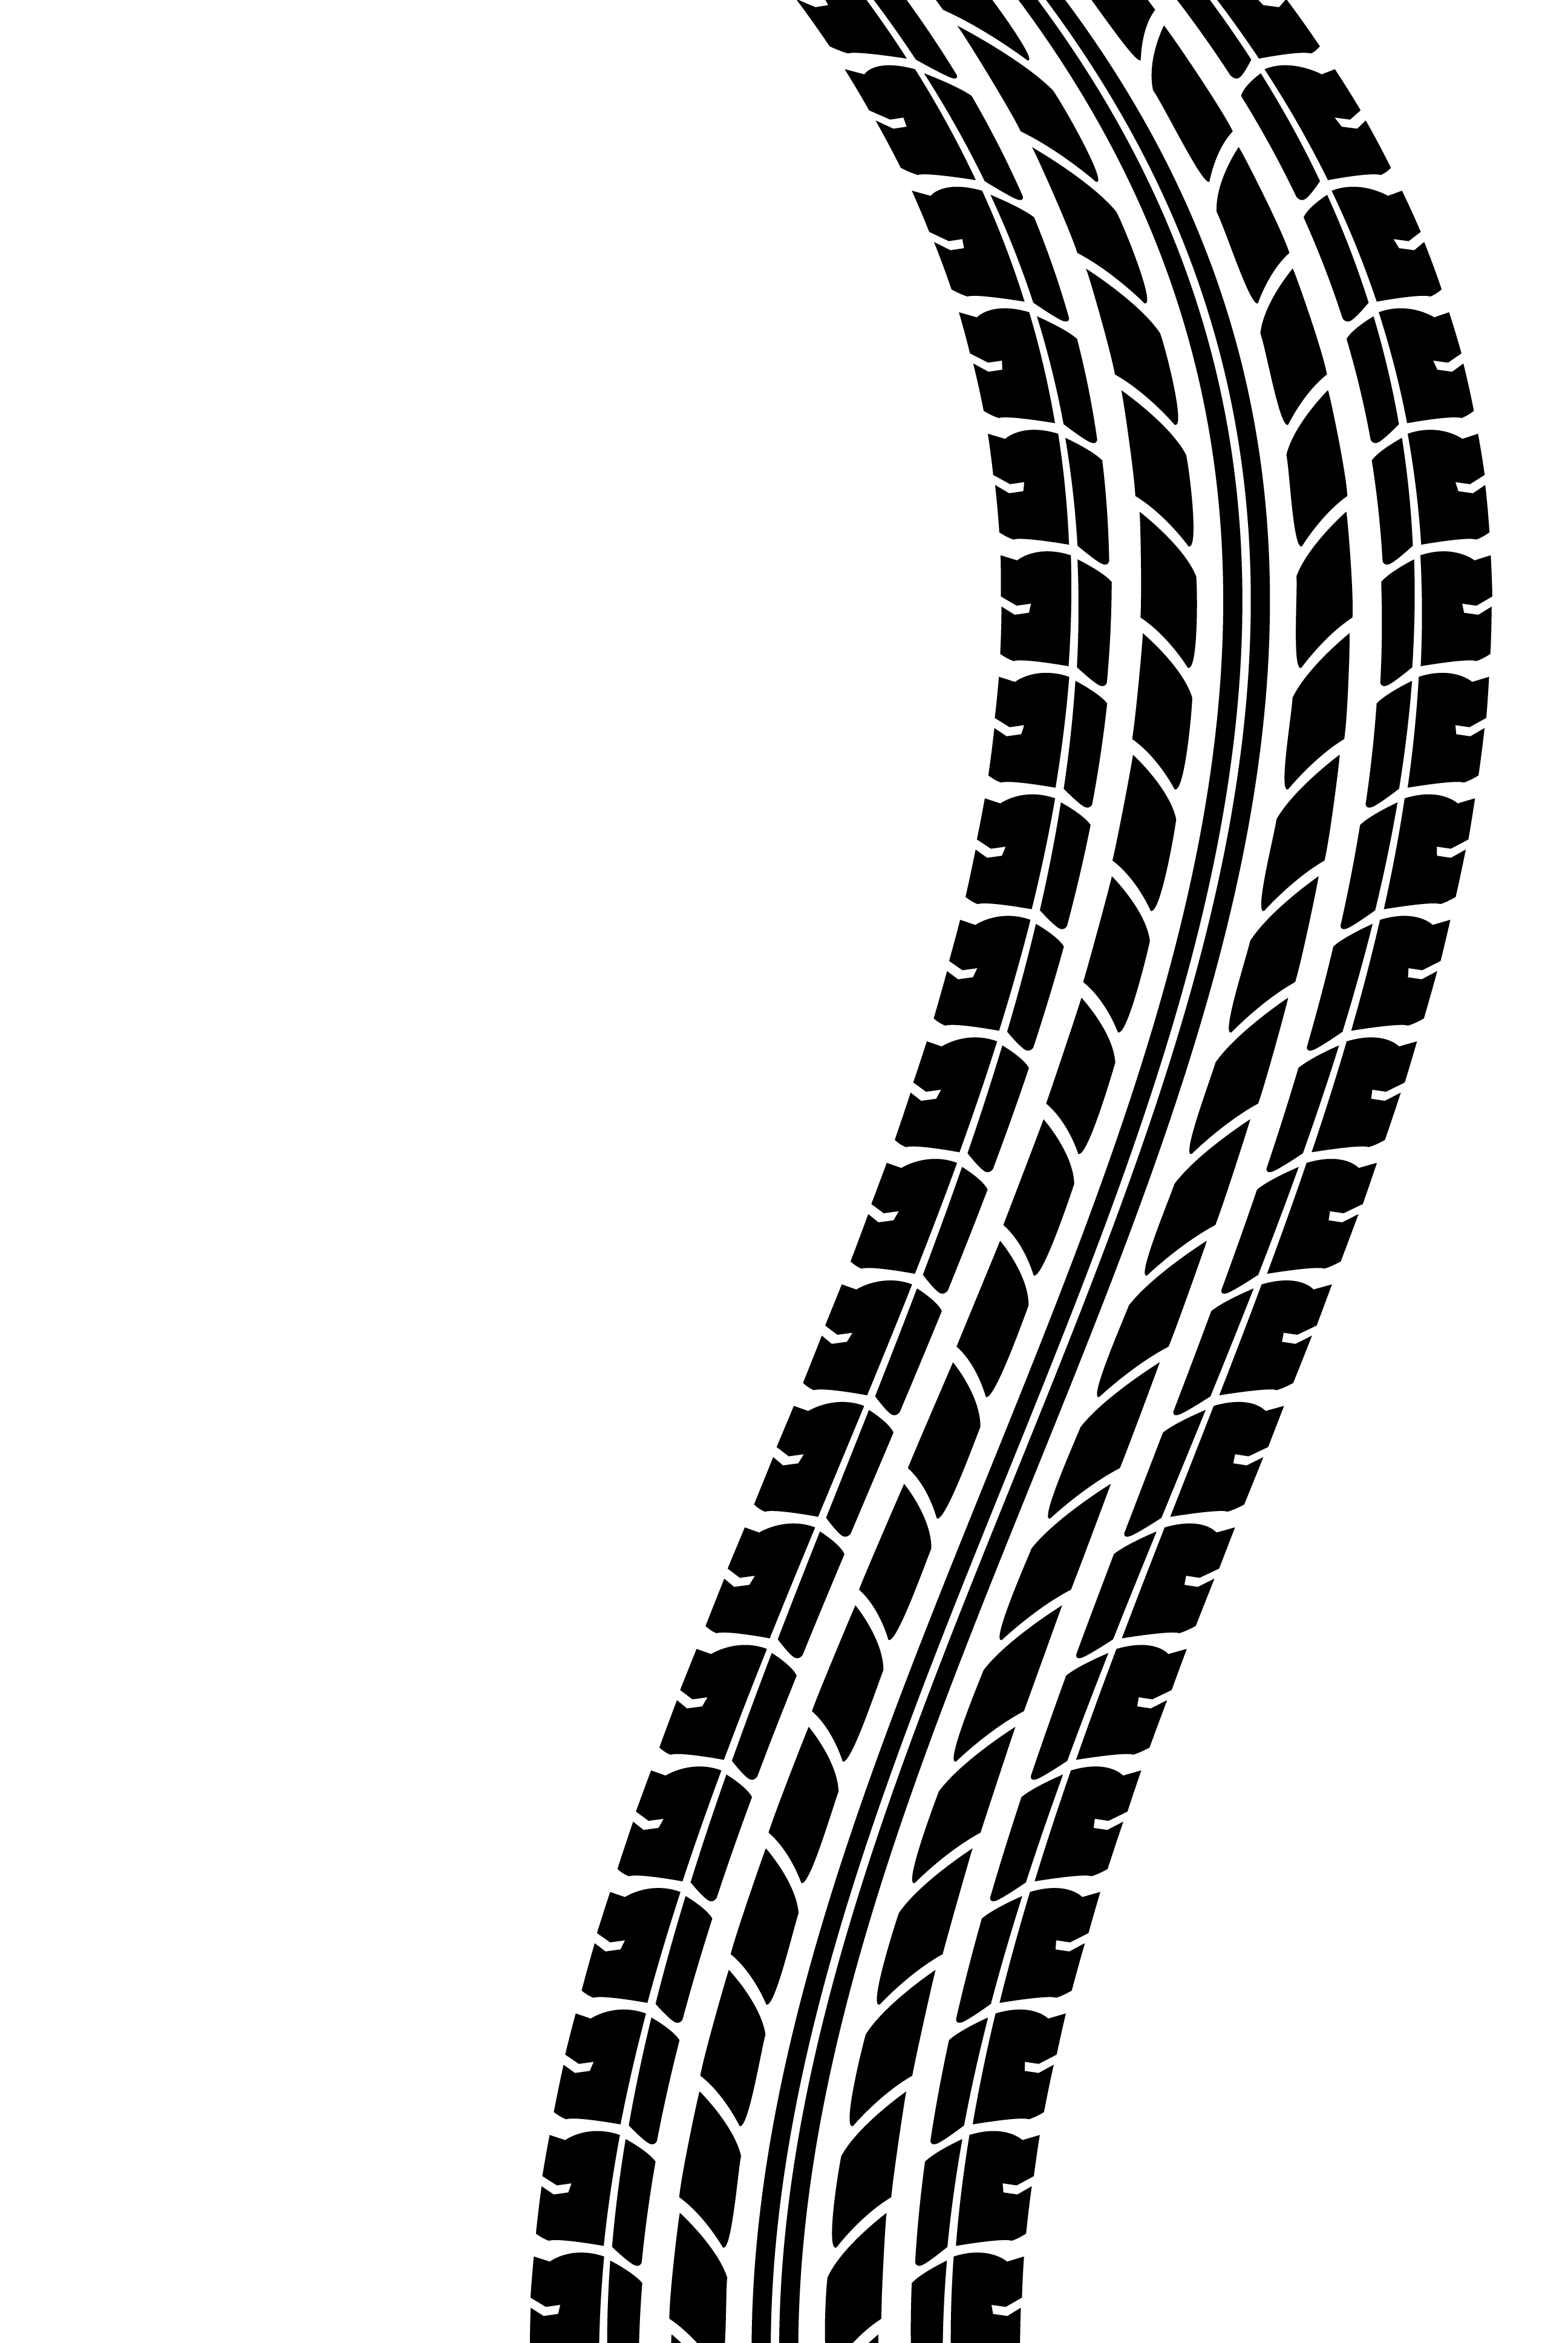 6 Motorcycle Tire Vector Images